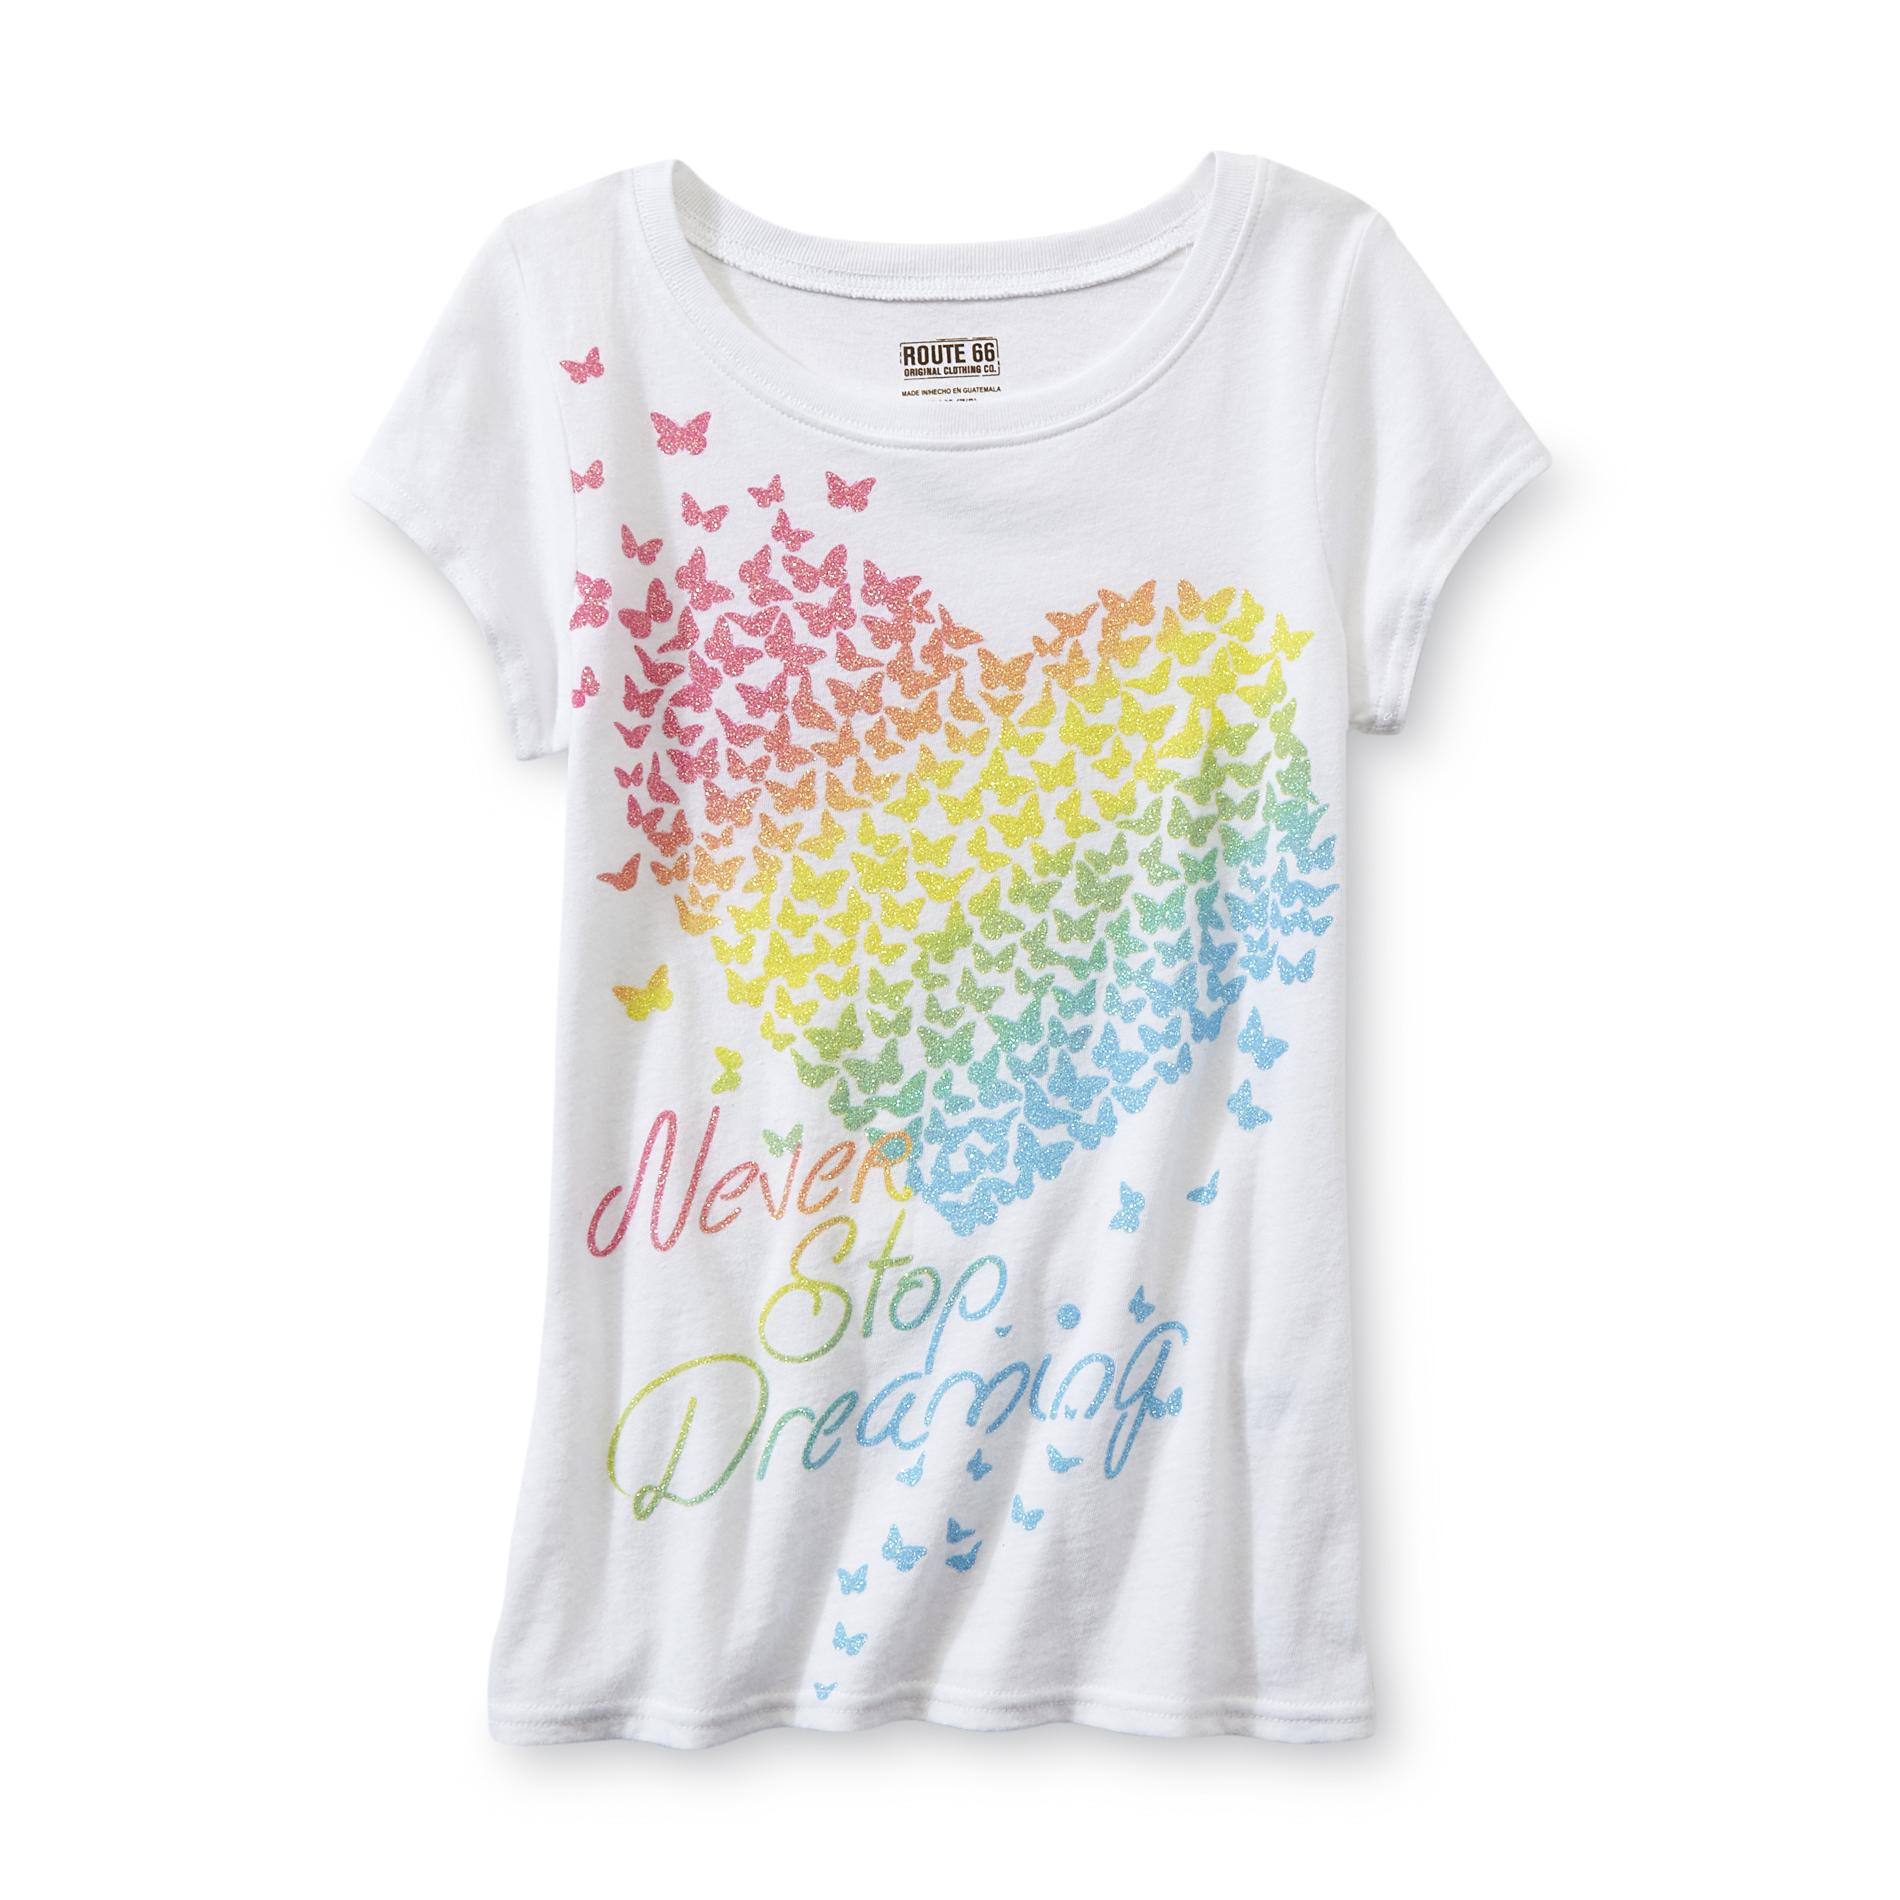 Route 66 Girl's Graphic T-Shirt - Rainbow Hearts & Butterflies